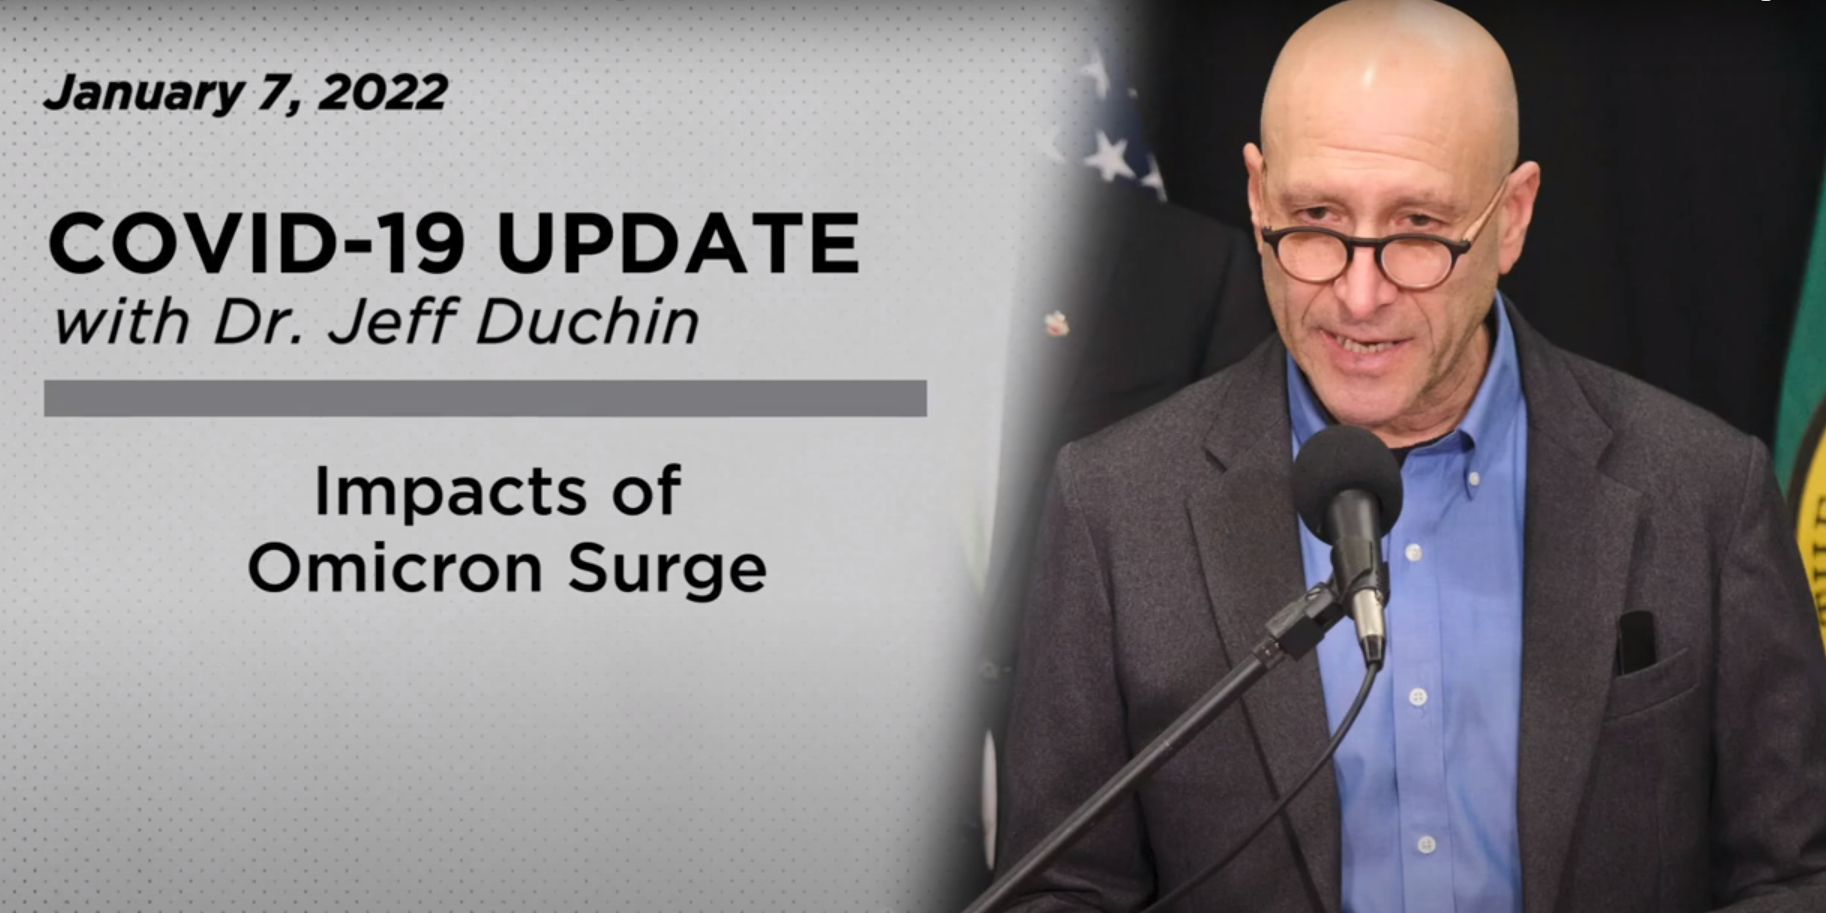 Video: Update from King County Health Officer on the impacts of the Omicron surge